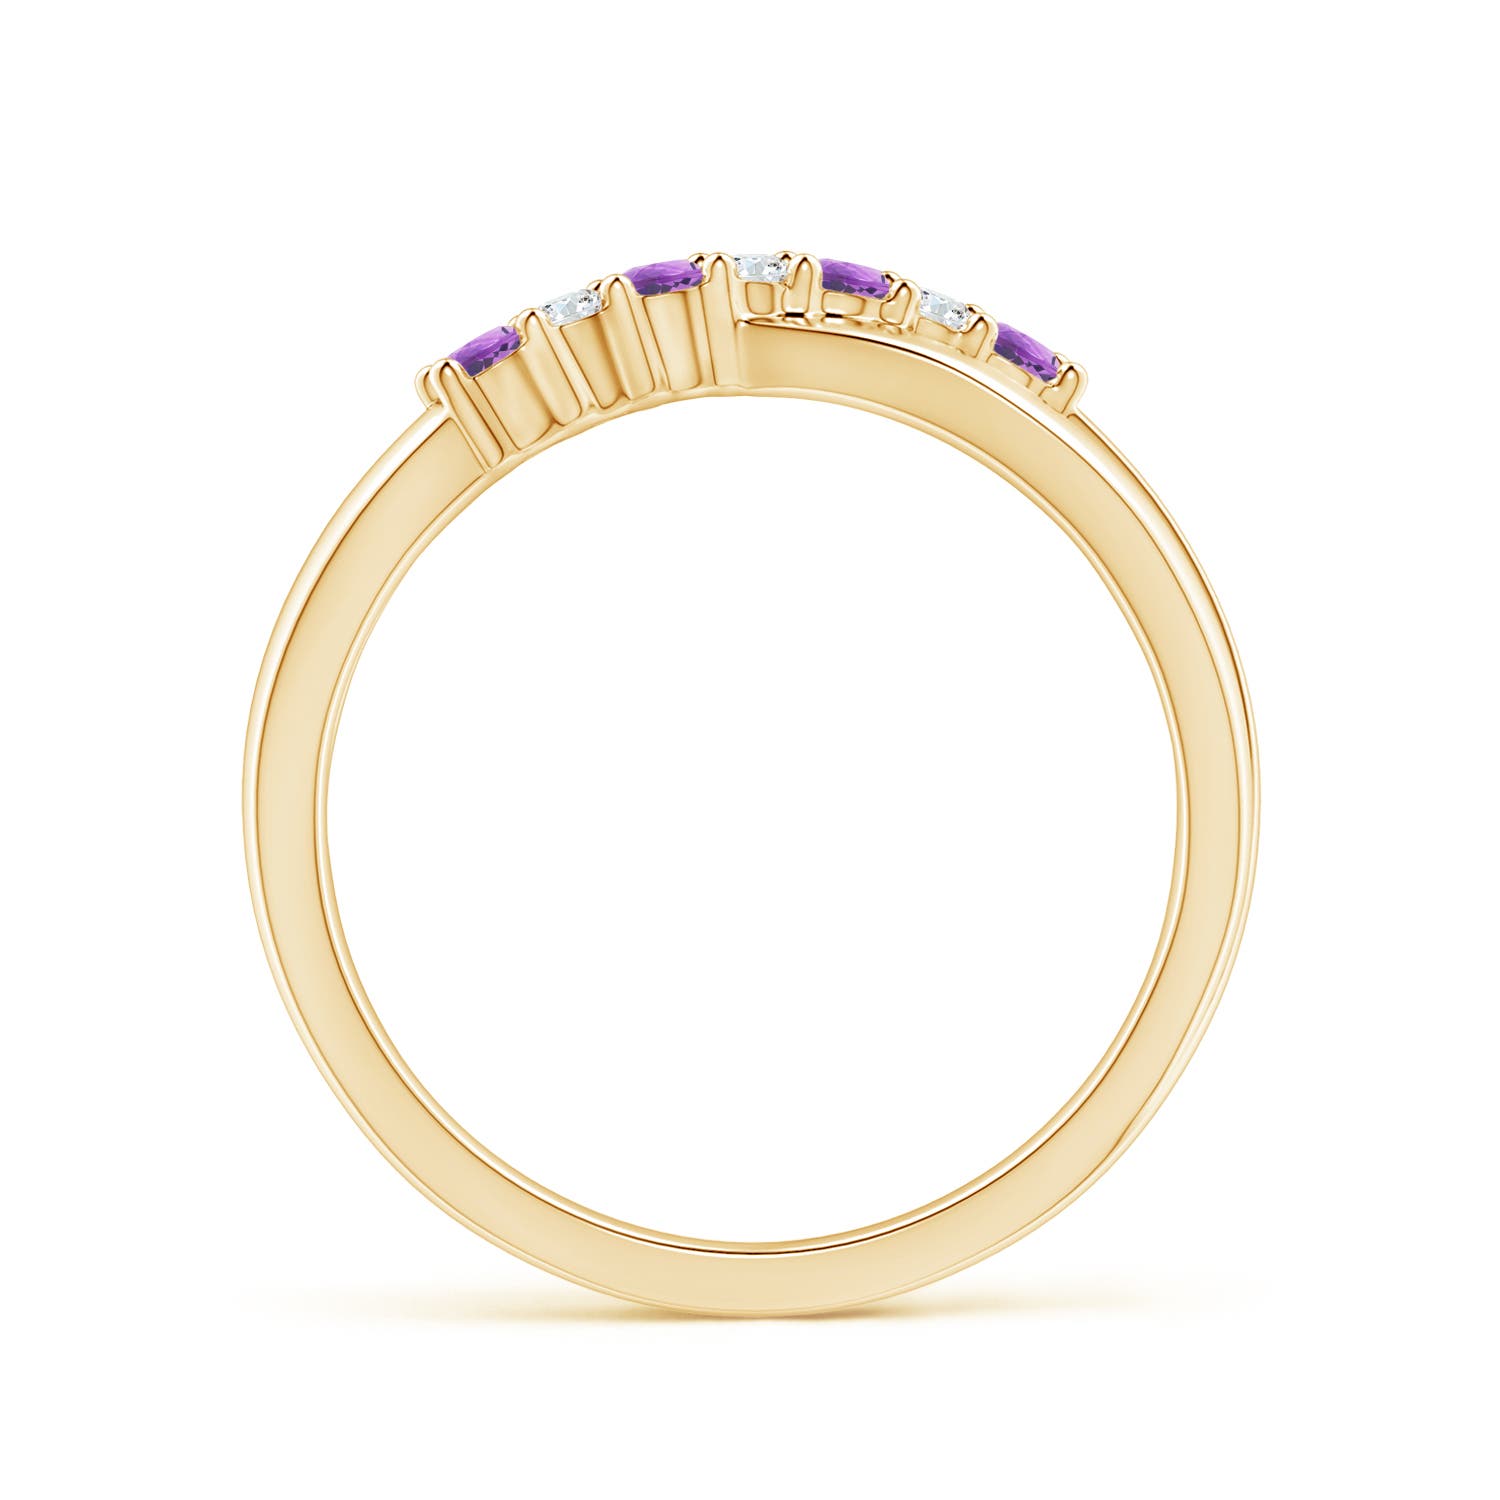 A - Amethyst / 0.18 CT / 14 KT Yellow Gold